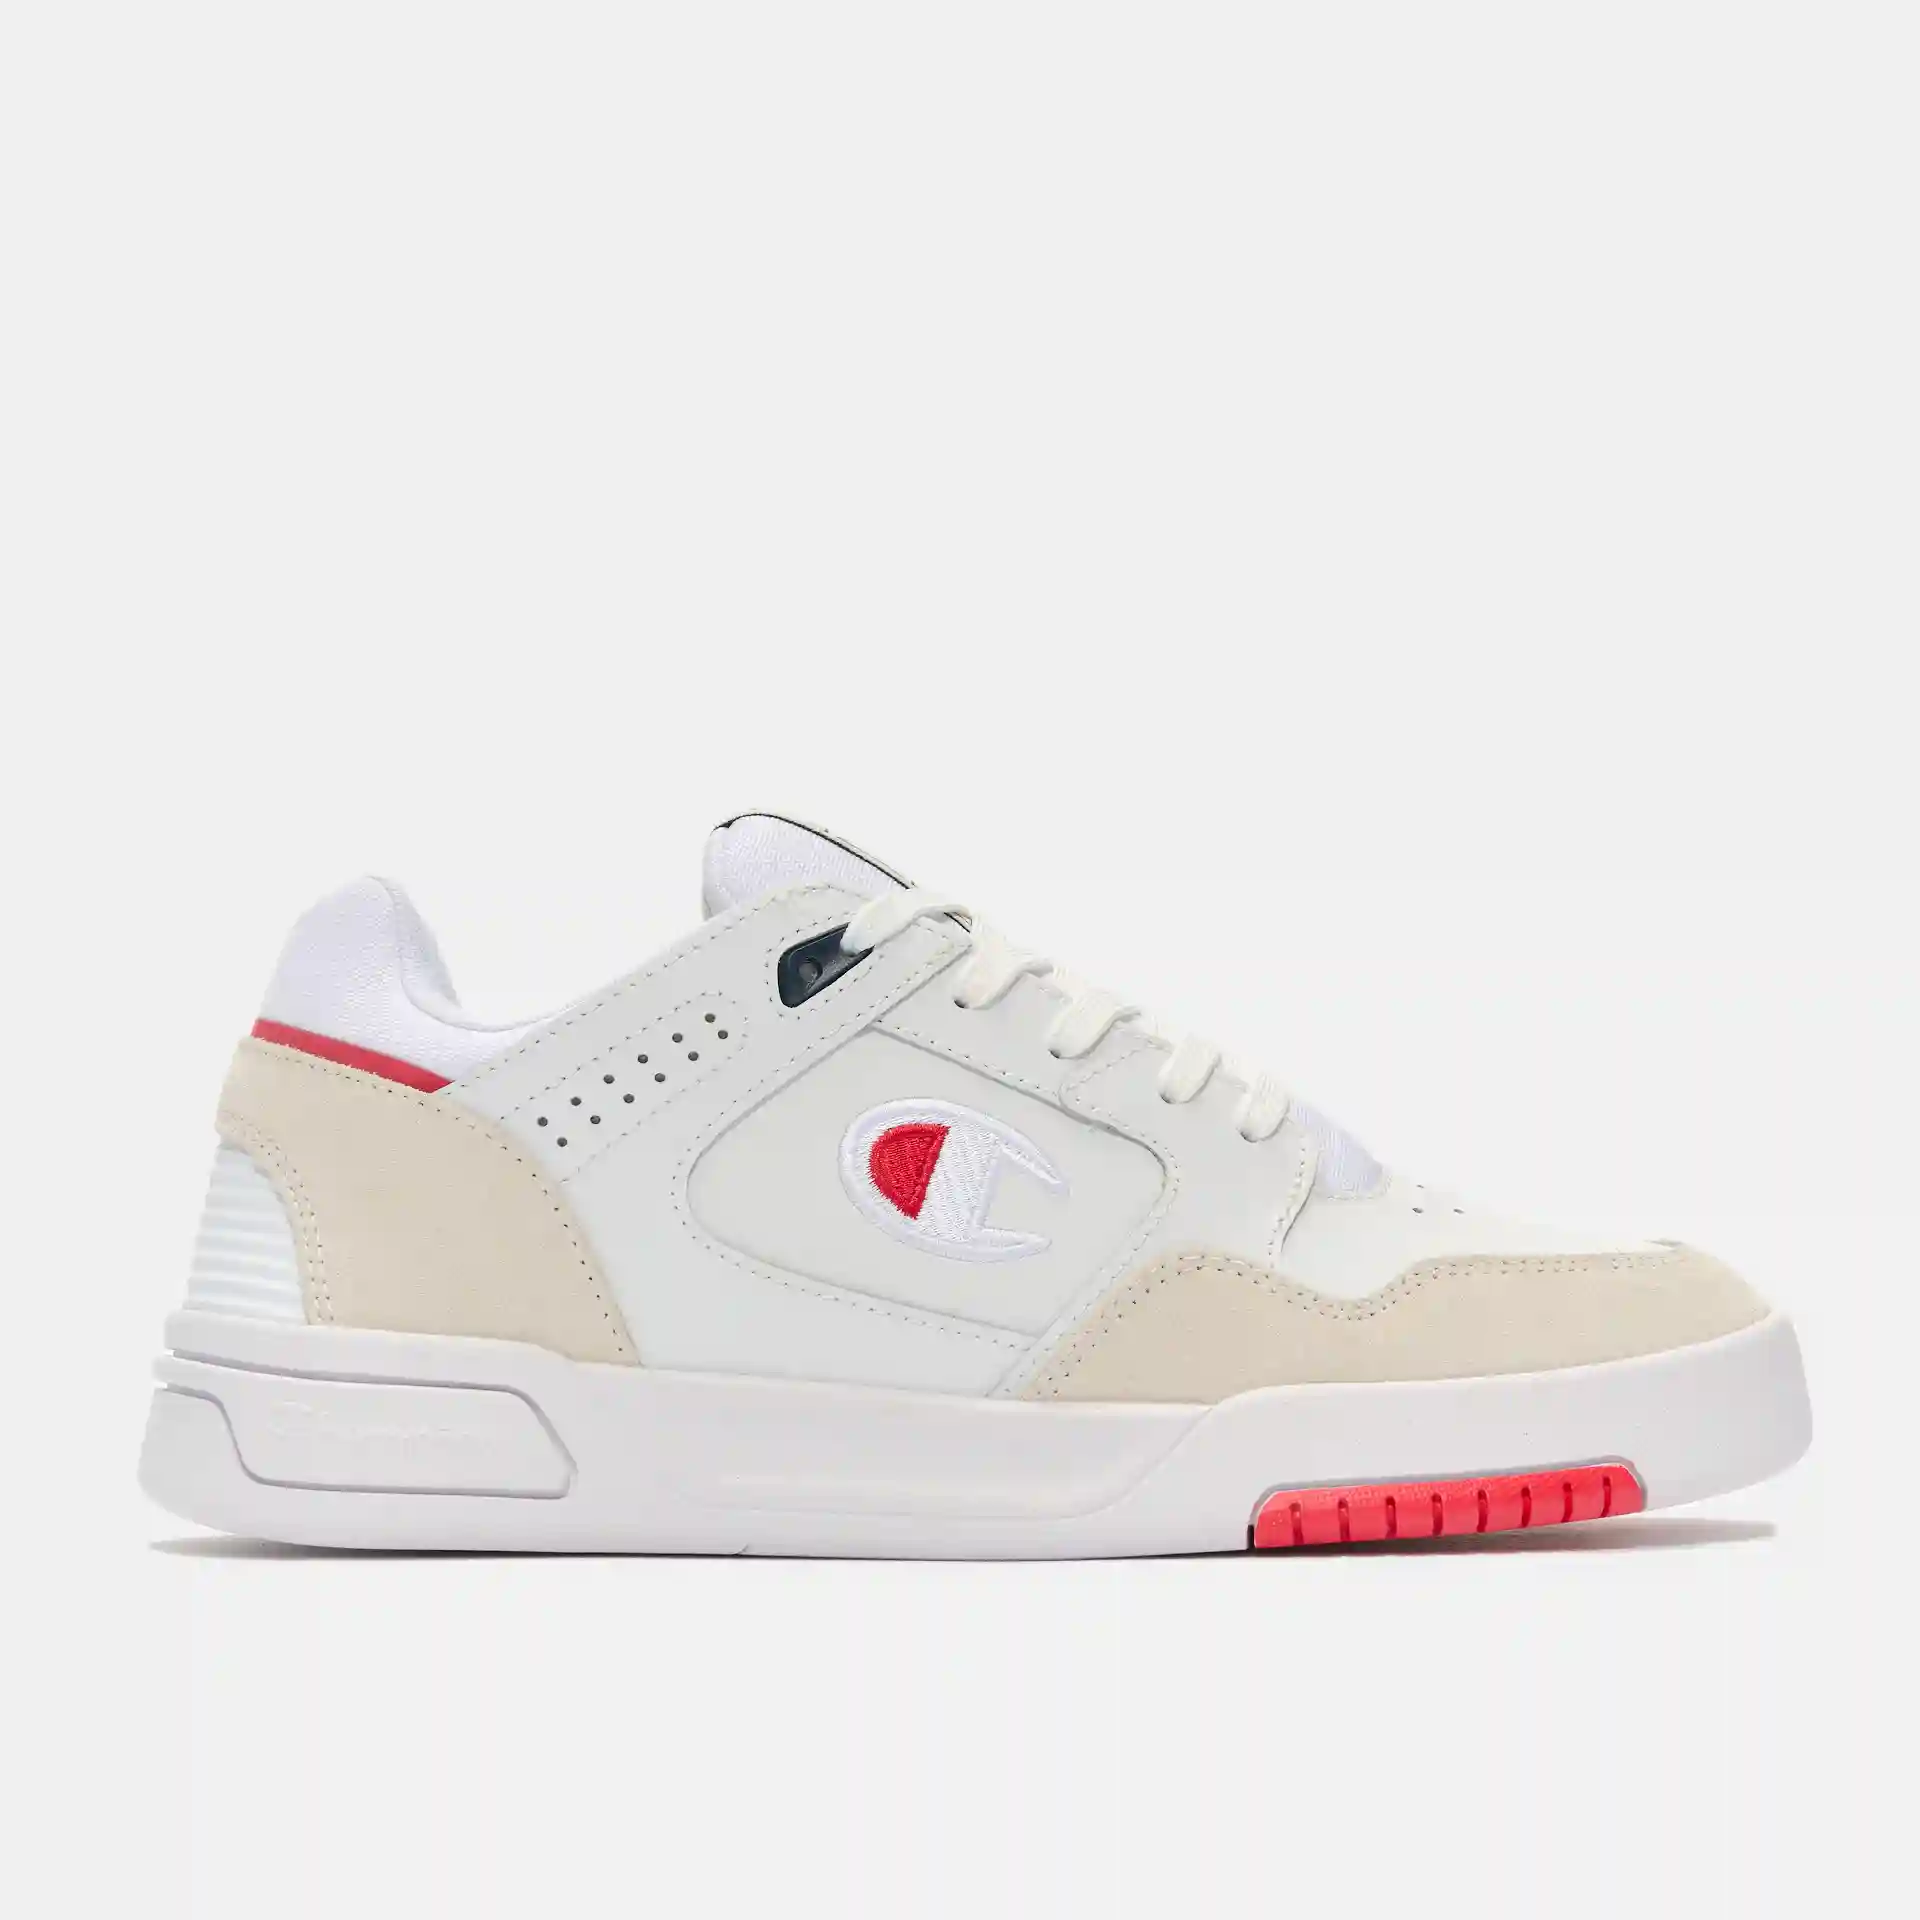 Champion Z80 SL Low Cut Sneakers White/Red